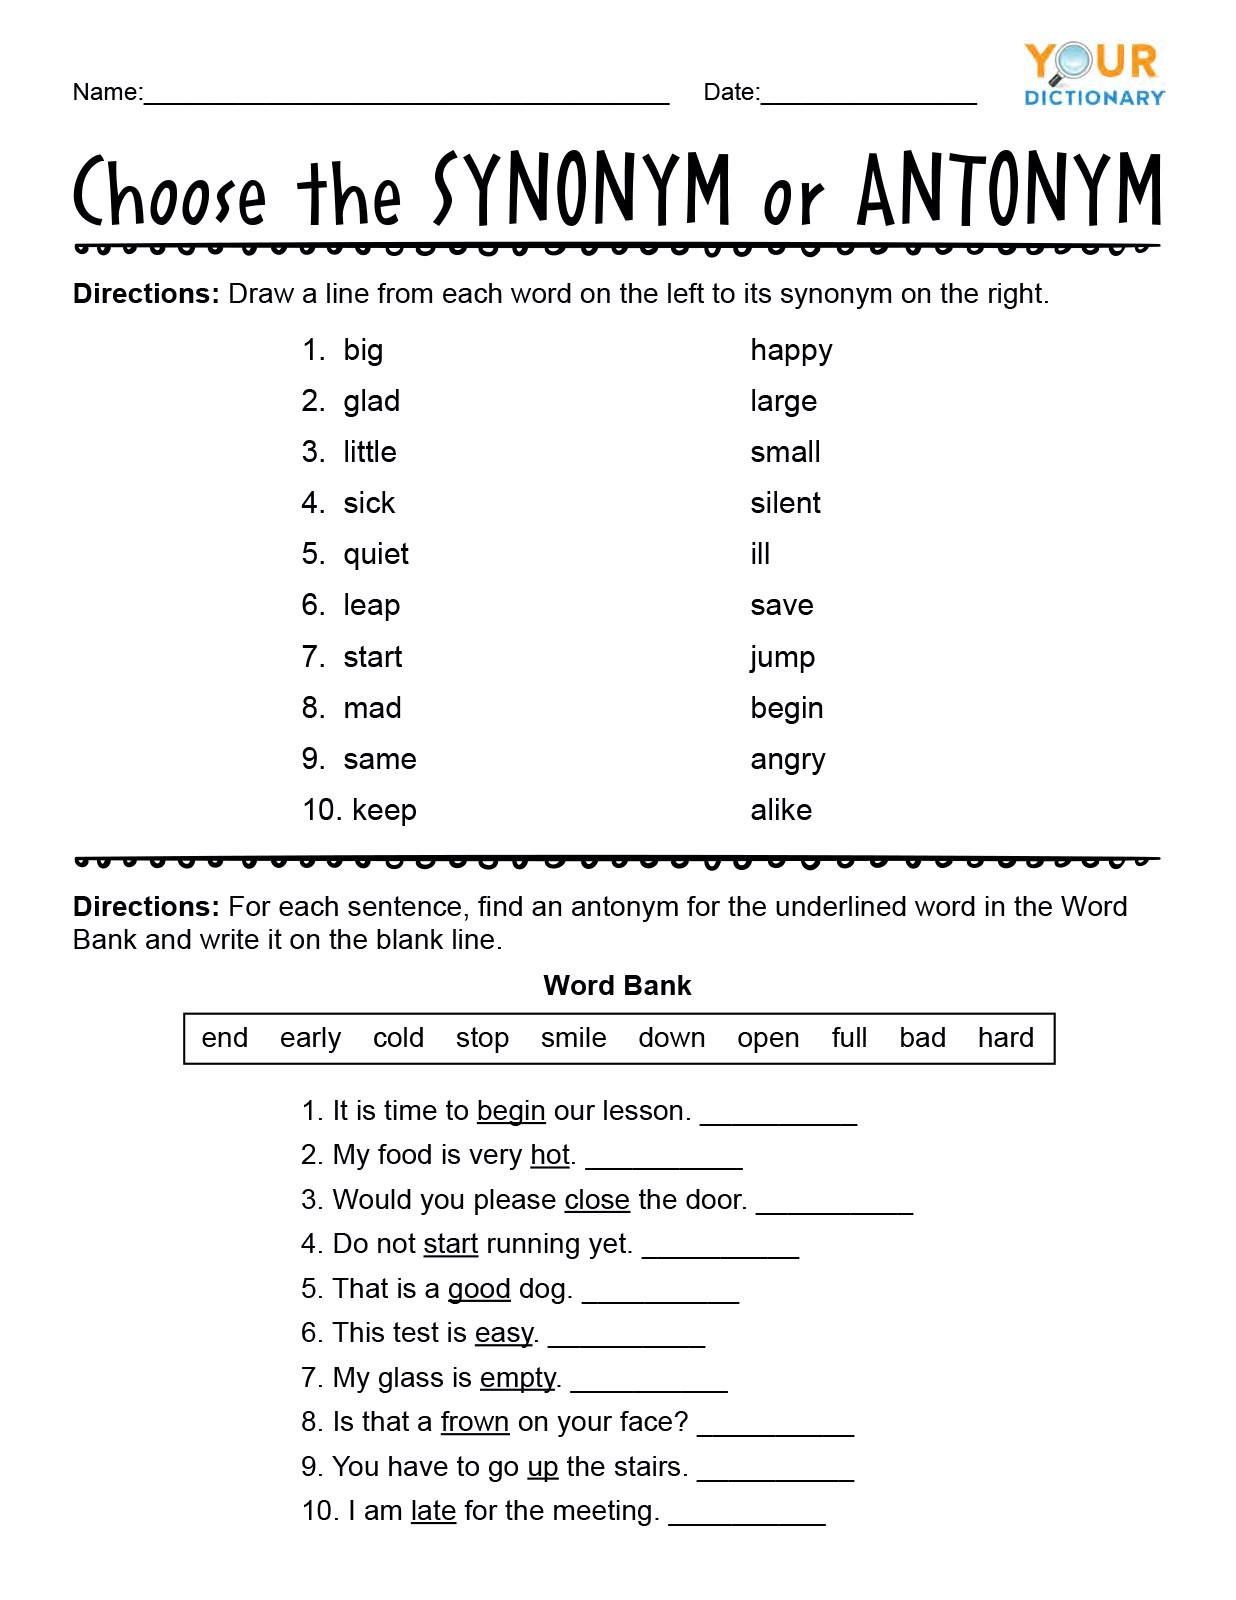 Synonyms Worksheet First Grade First Grade Synonyms and Antonyms Worksheets